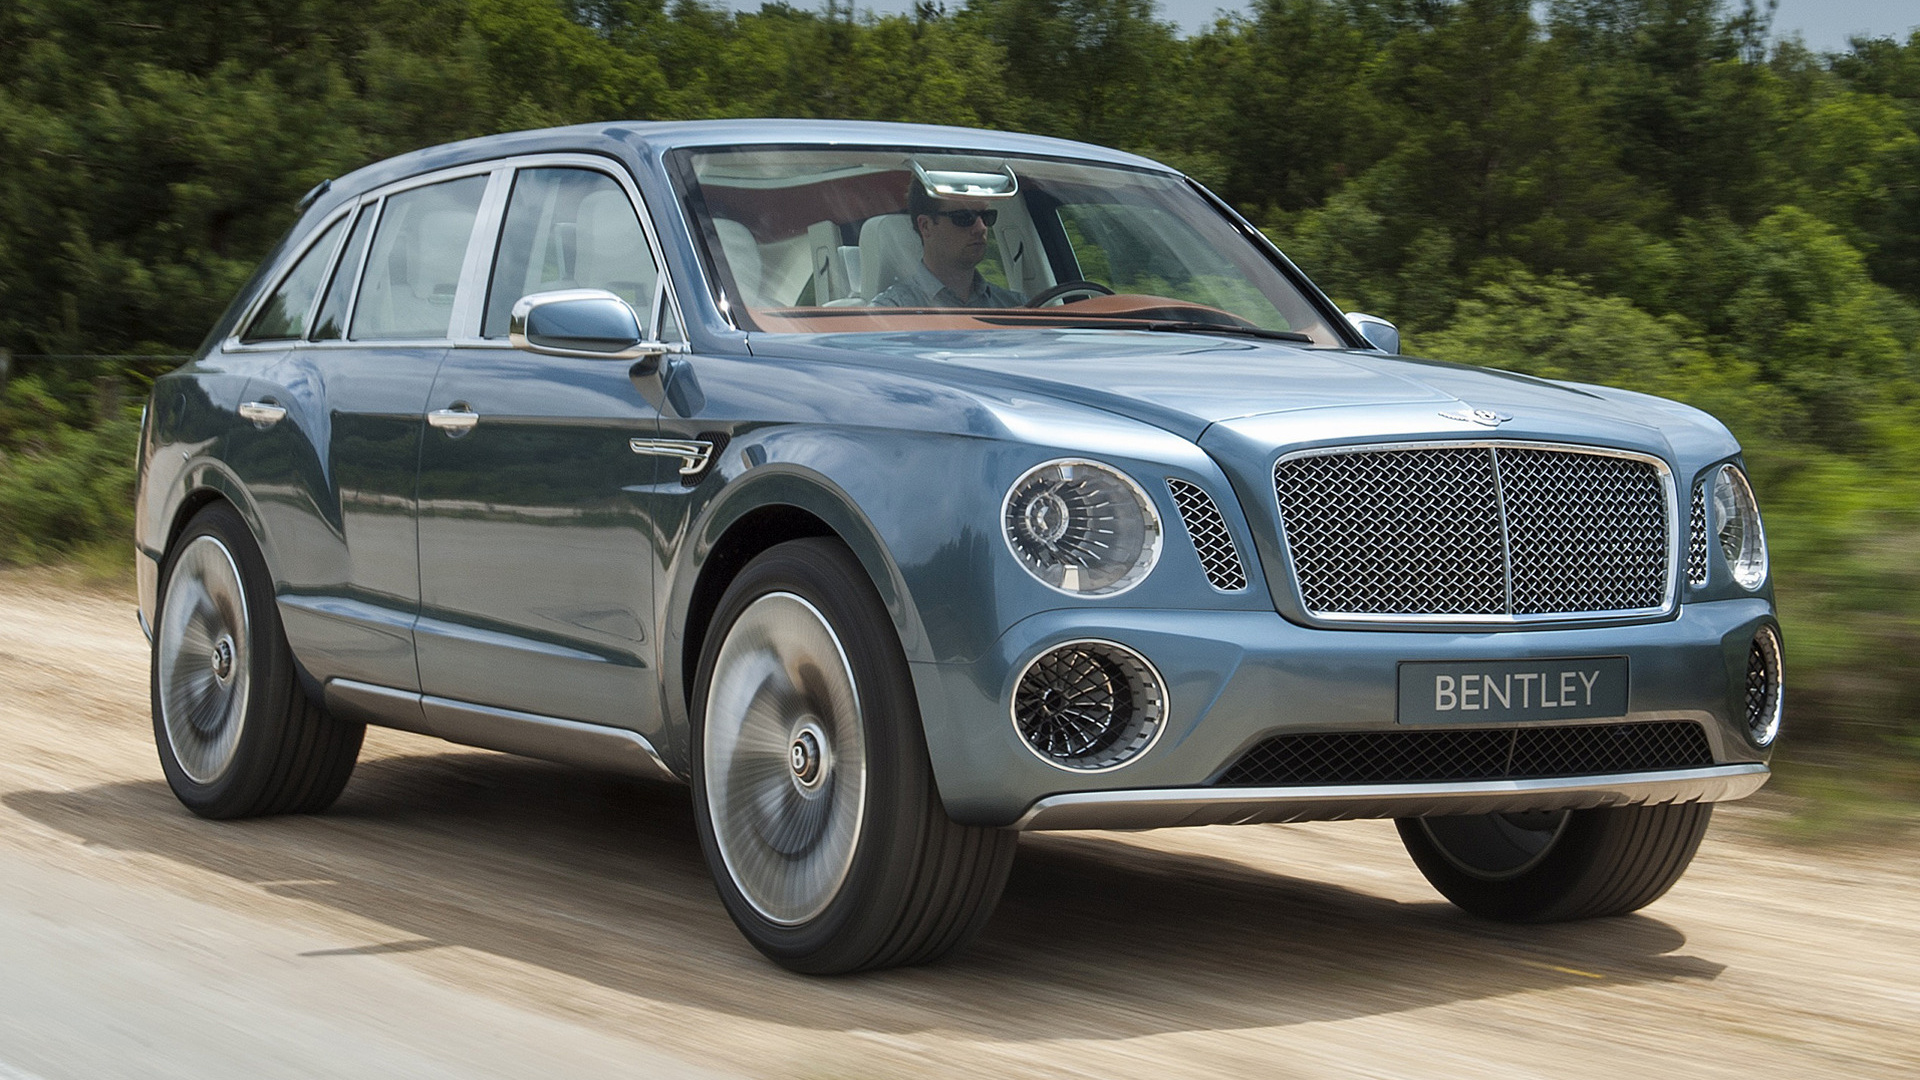 The Future Of Luxury: The 2012 Bentley EXP 9 F Concept